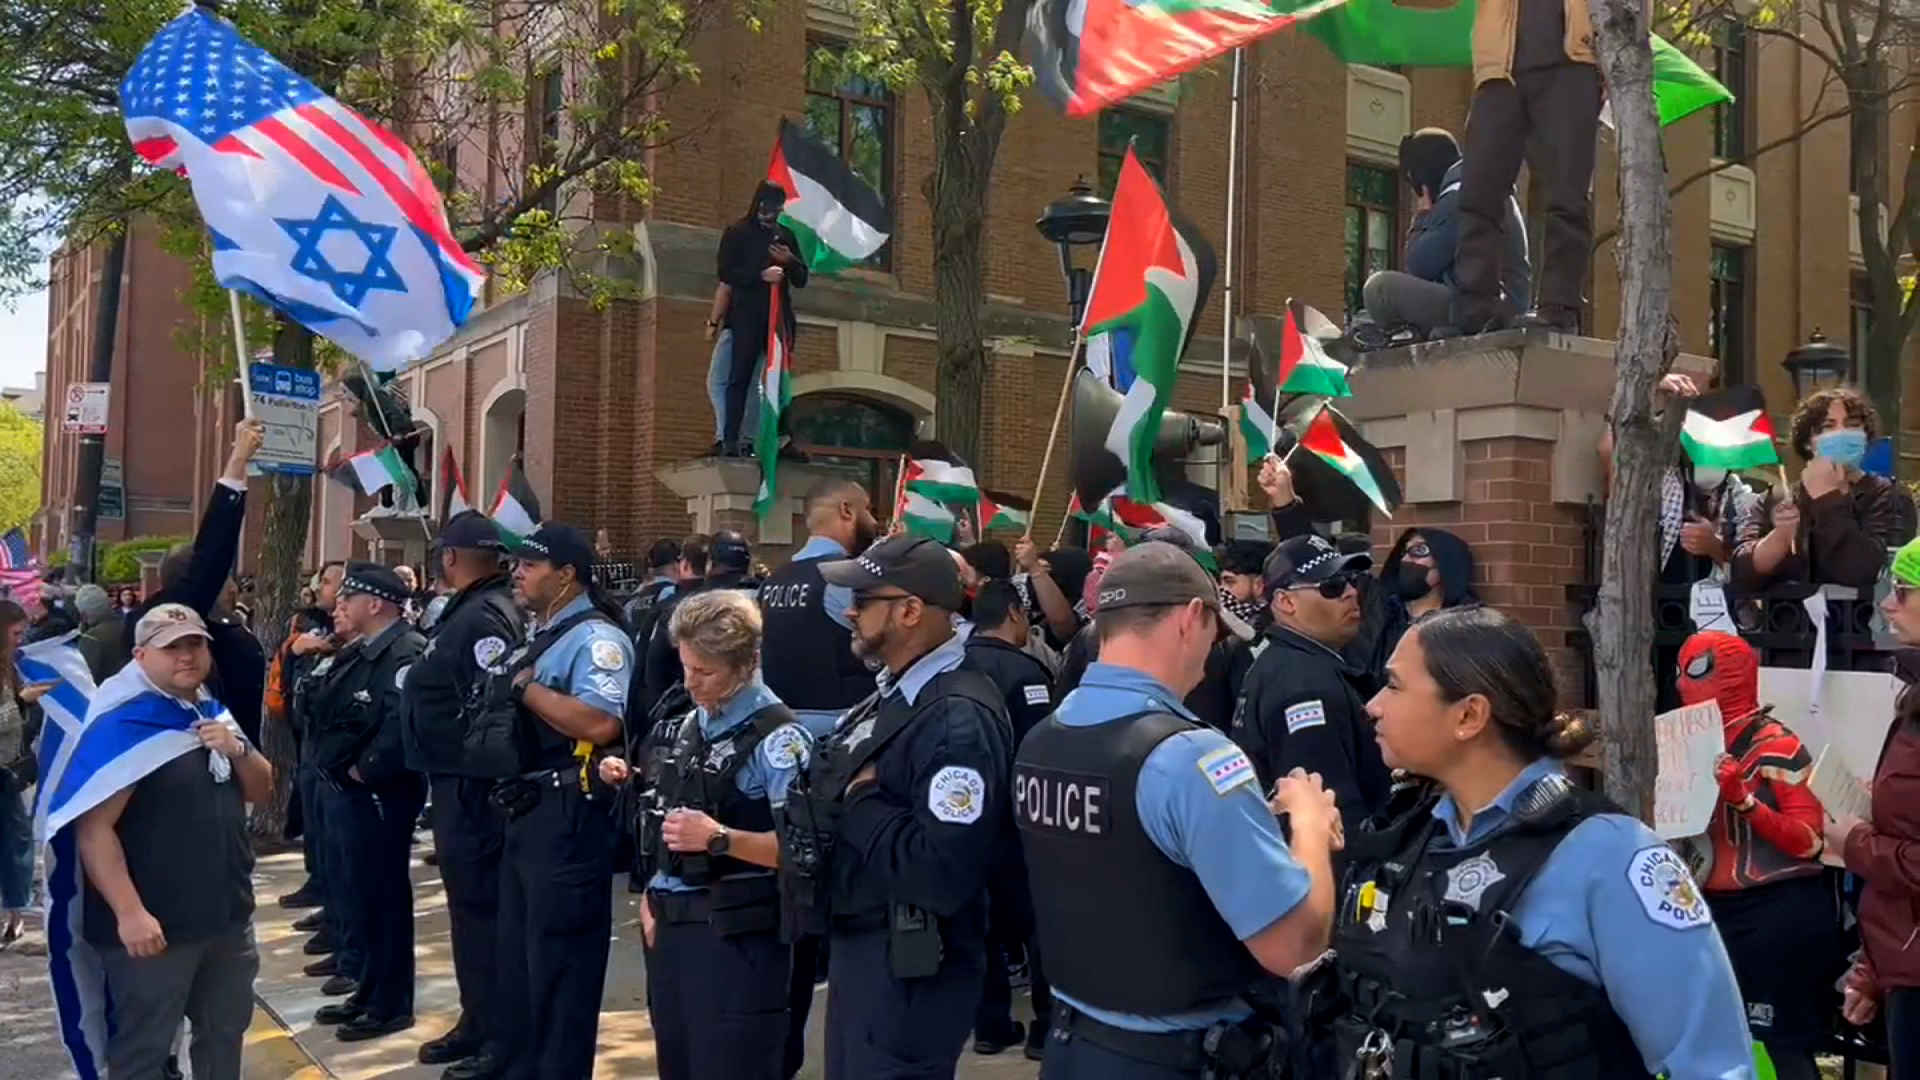 This screen grab from video shot by CNN shows police, protesters and counter-protesters at DePaul University in Chicago on May 5.